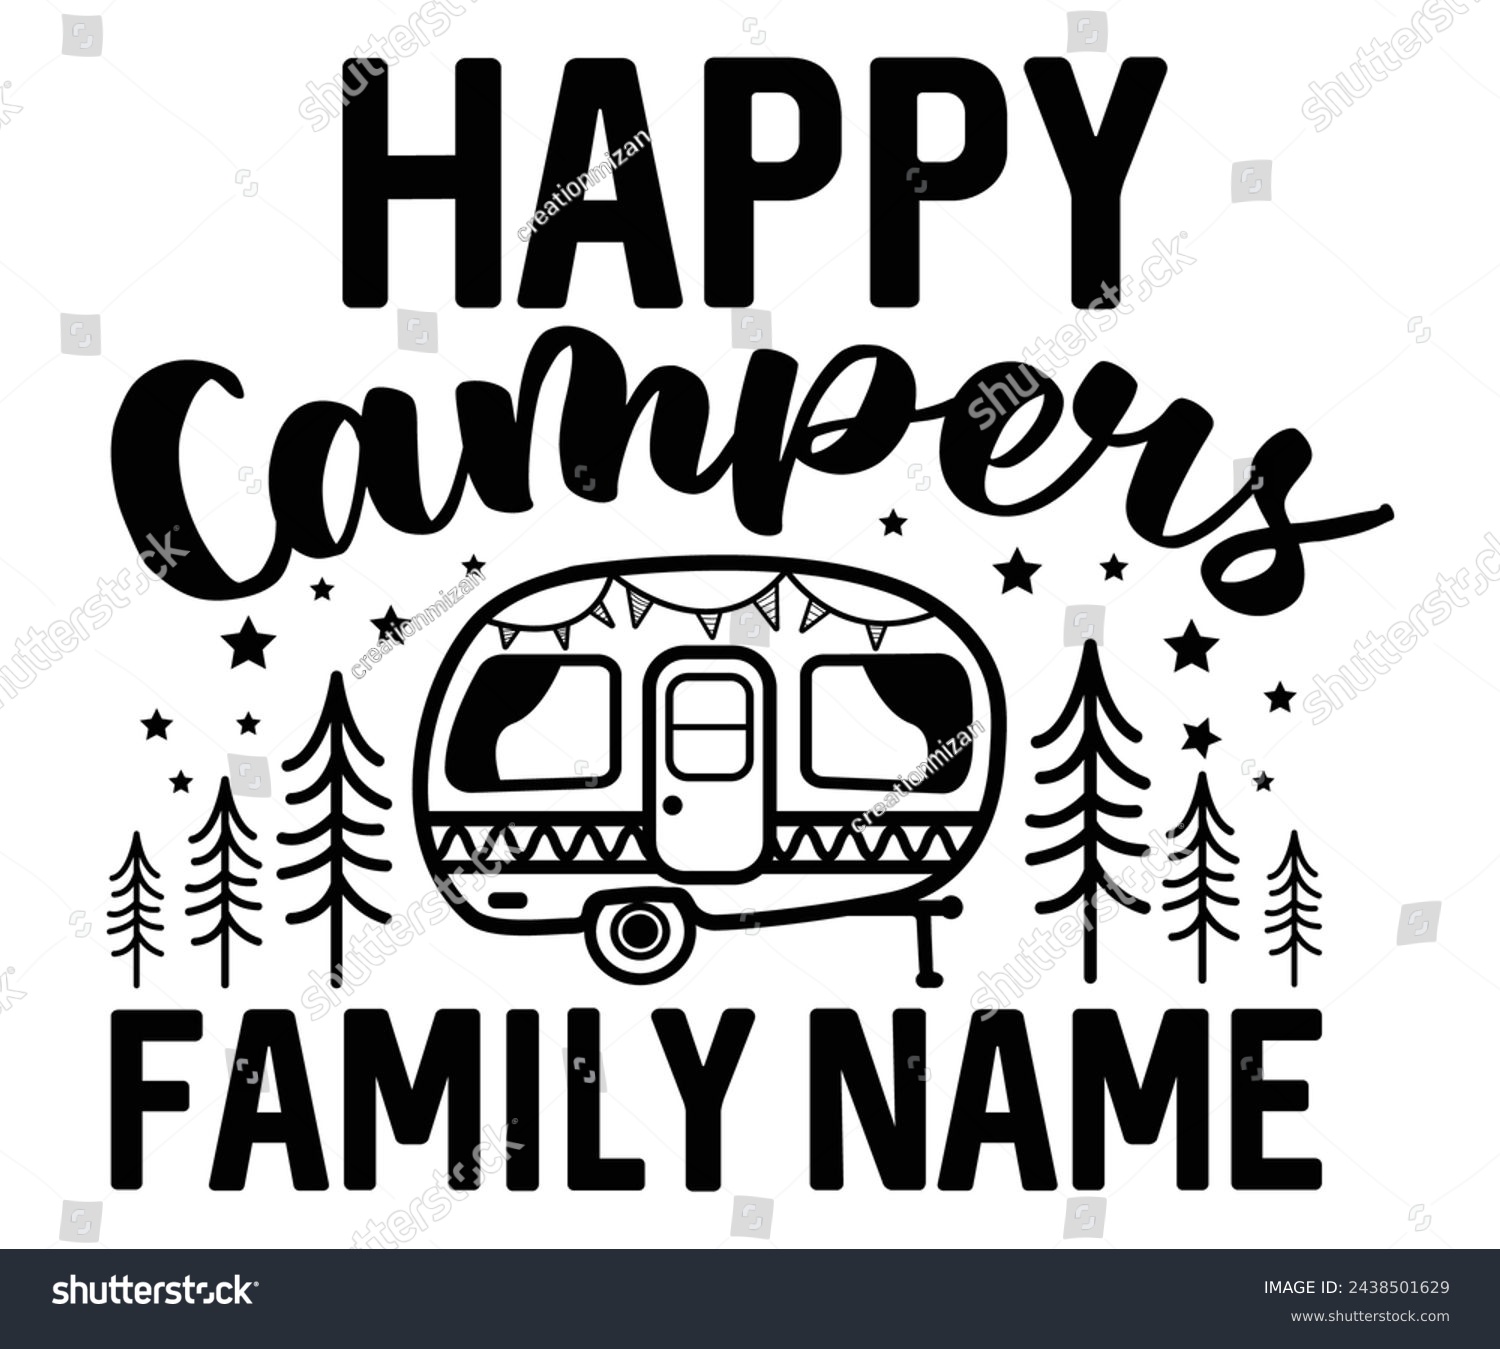 SVG of Happy Campers Family Name 
 Svg,Camping Svg,Hiking,Funny Camping,Adventure,Summer Camp,Happy Camper,Camp Life,Camp Saying,Camping Shirt svg